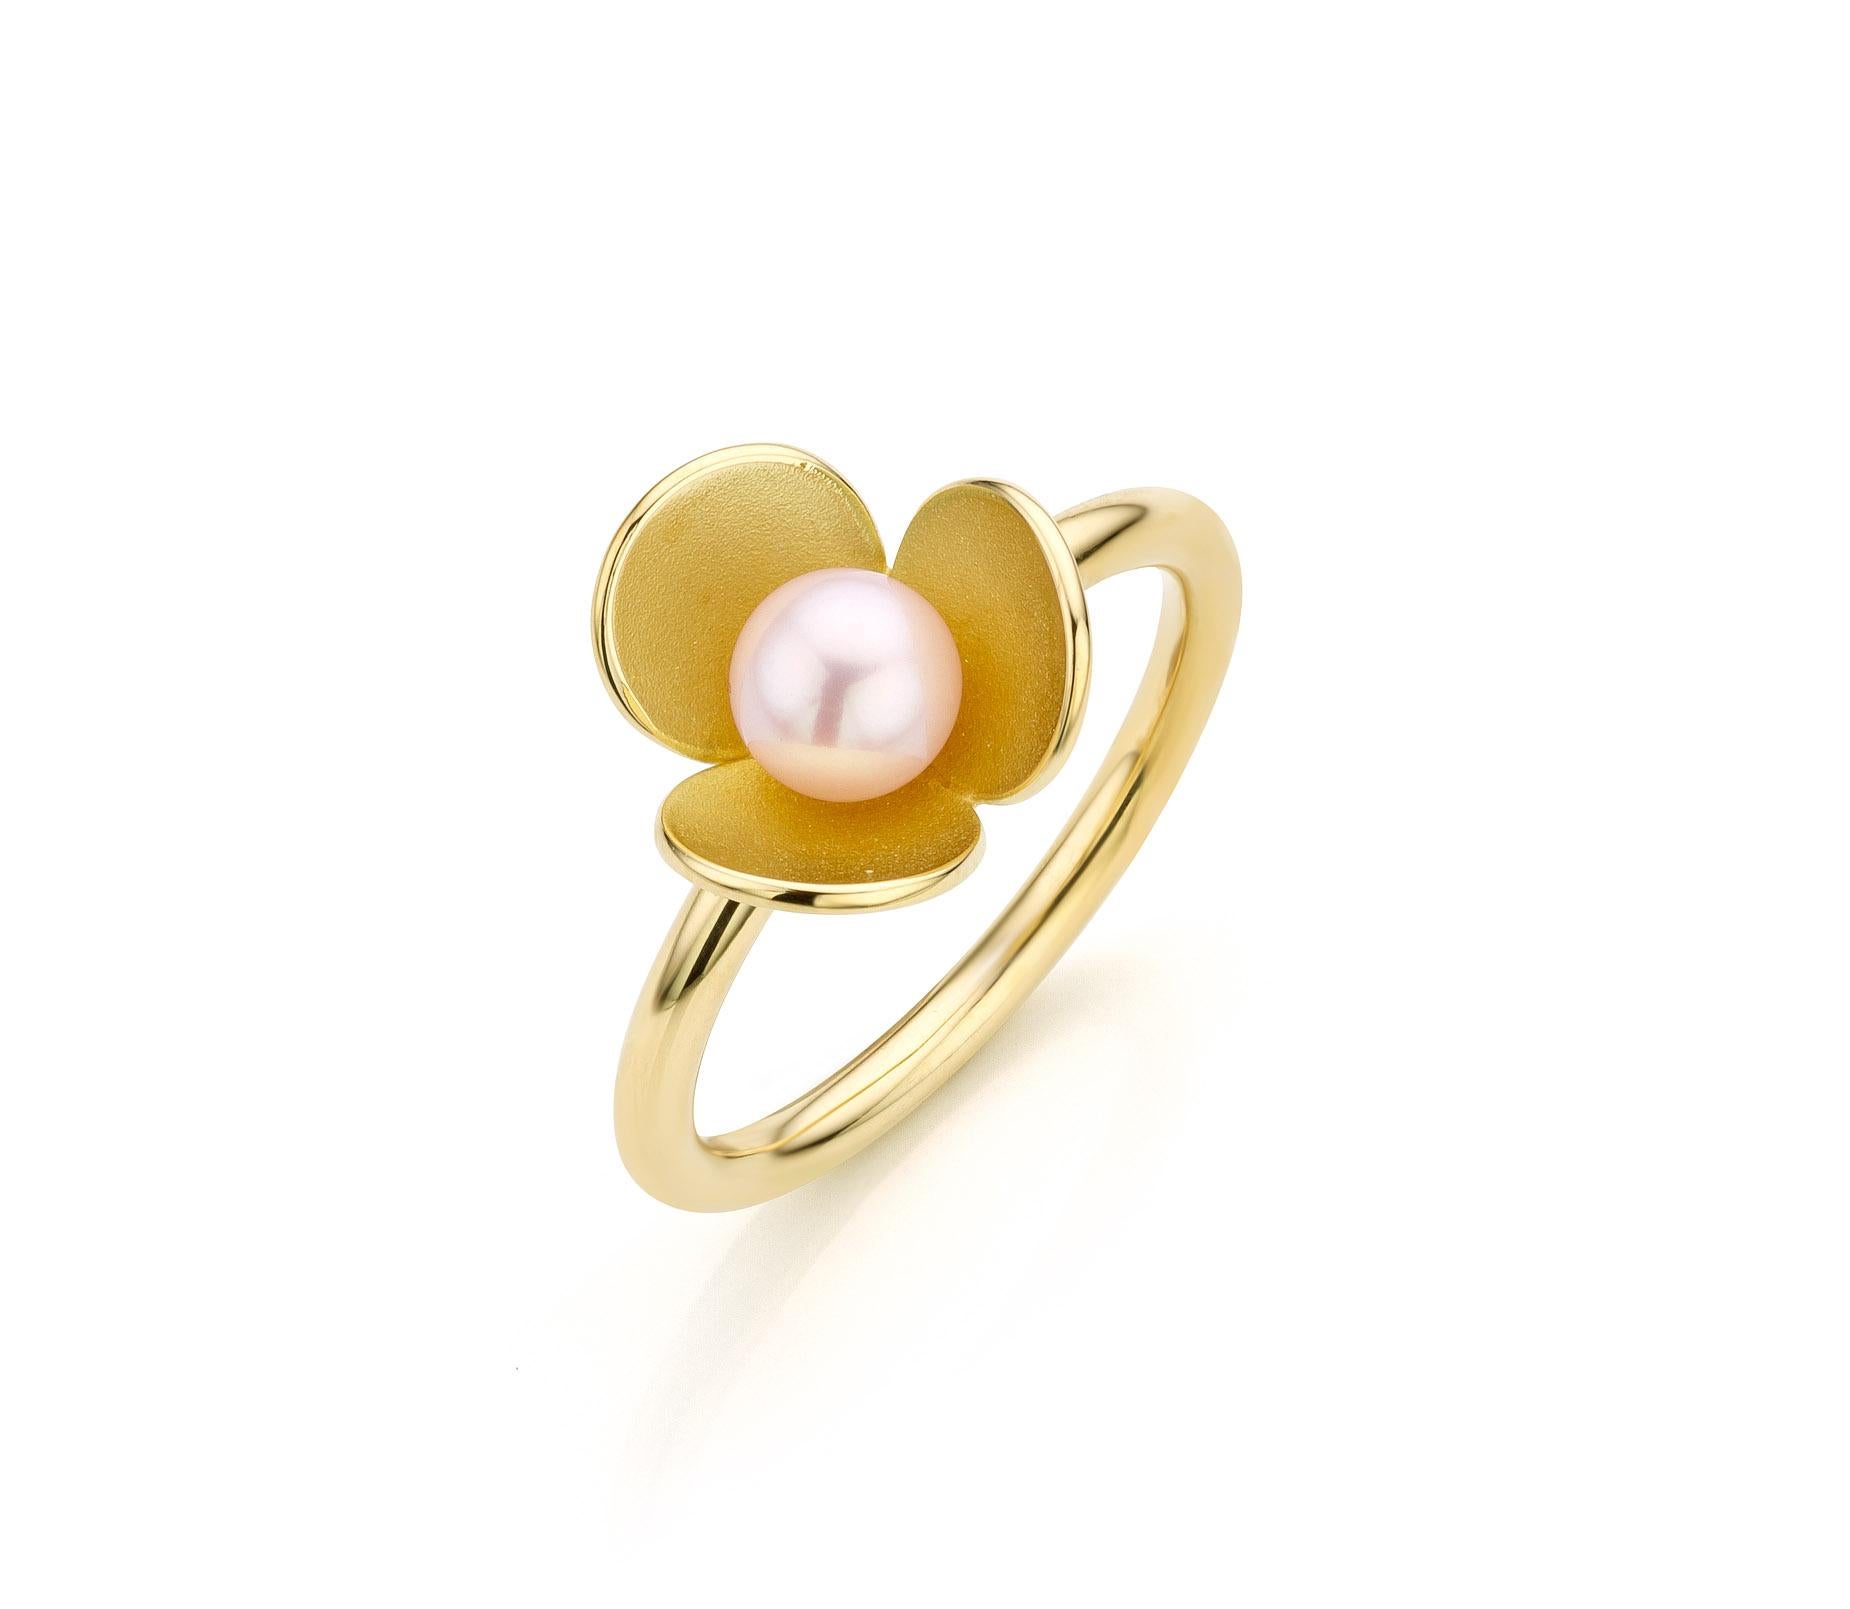 Romantic 18 karat yellow gold pearl flower ring For Sale